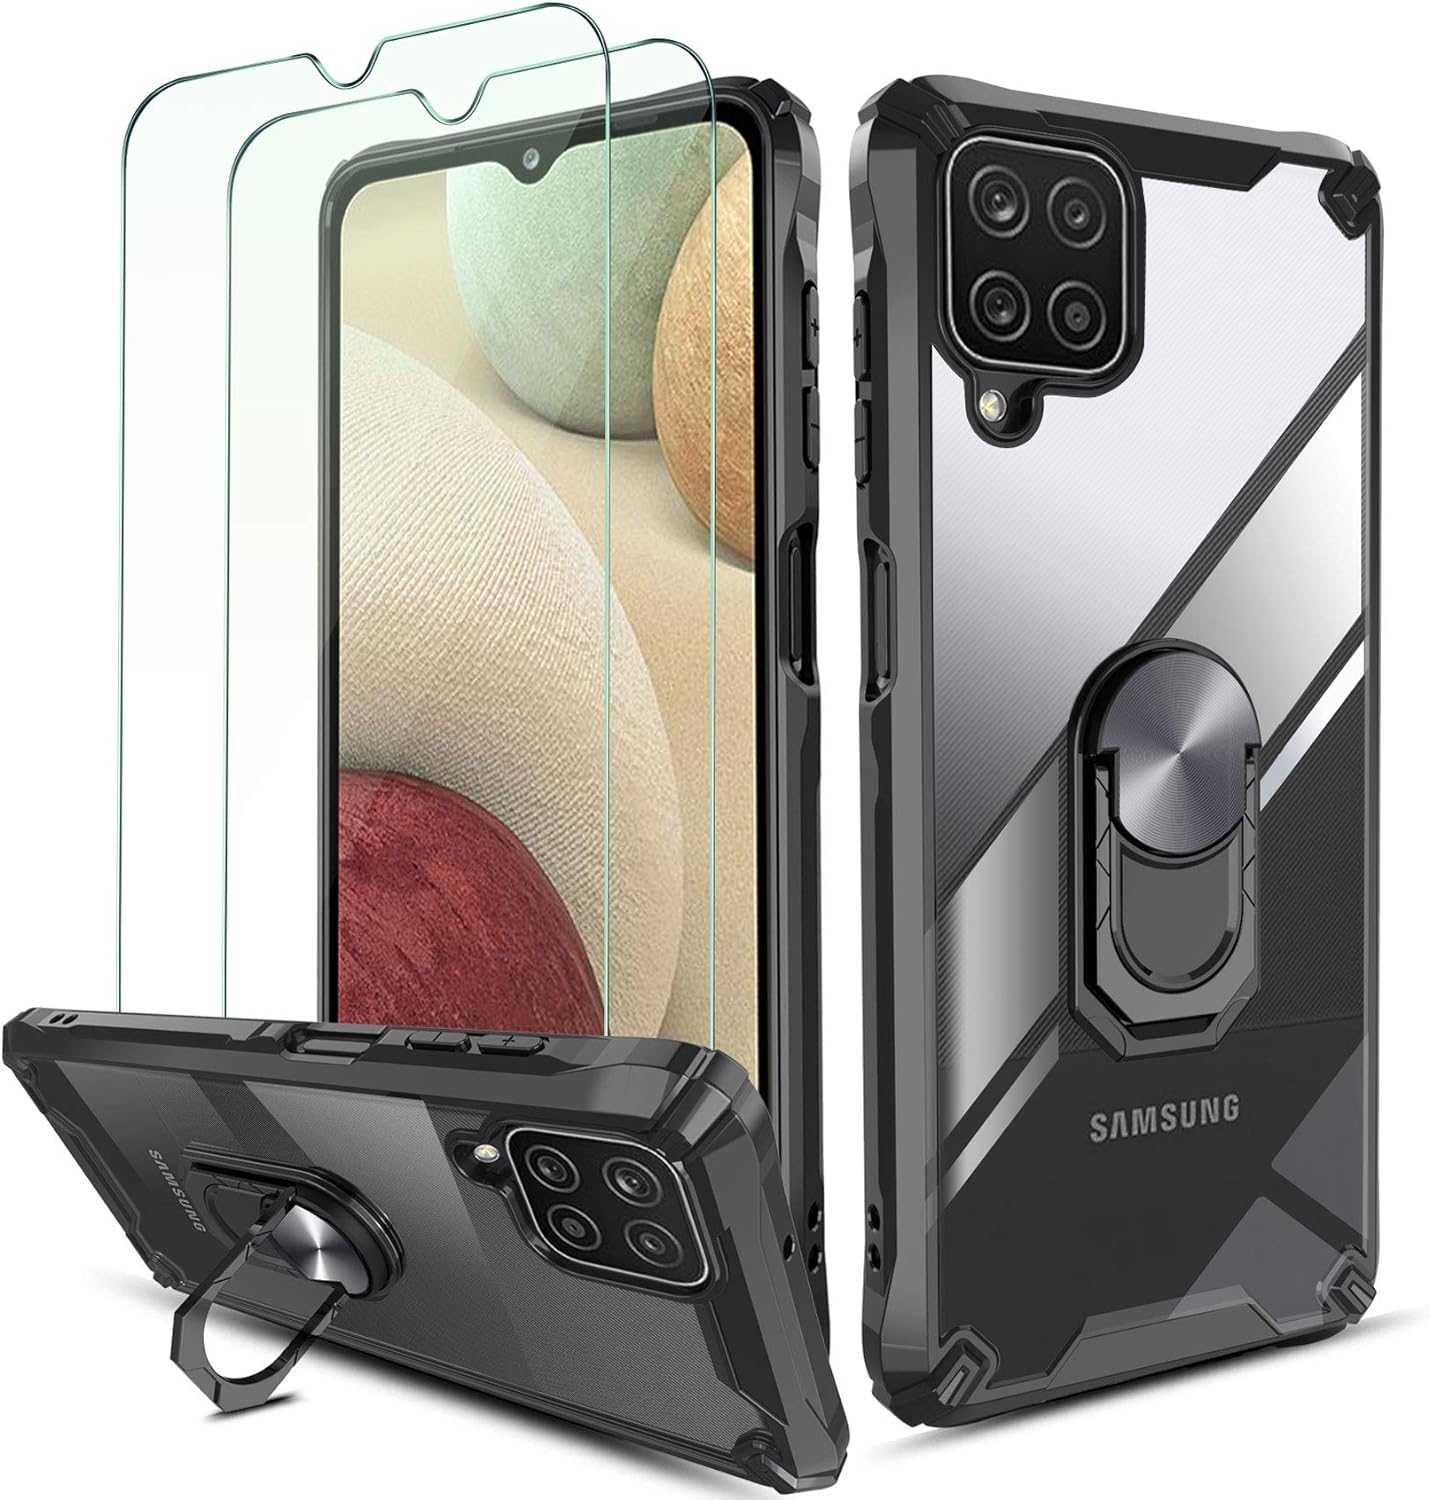 QHOHQ Case for Samsung Galaxy A12 6.5 with 2 Pack Screen Protector,[360 Rotating Stand] [Military Grade Anti-Fall Protection],Transparent PC Back Cover,Rugged Shockproof Edge Protection-Black